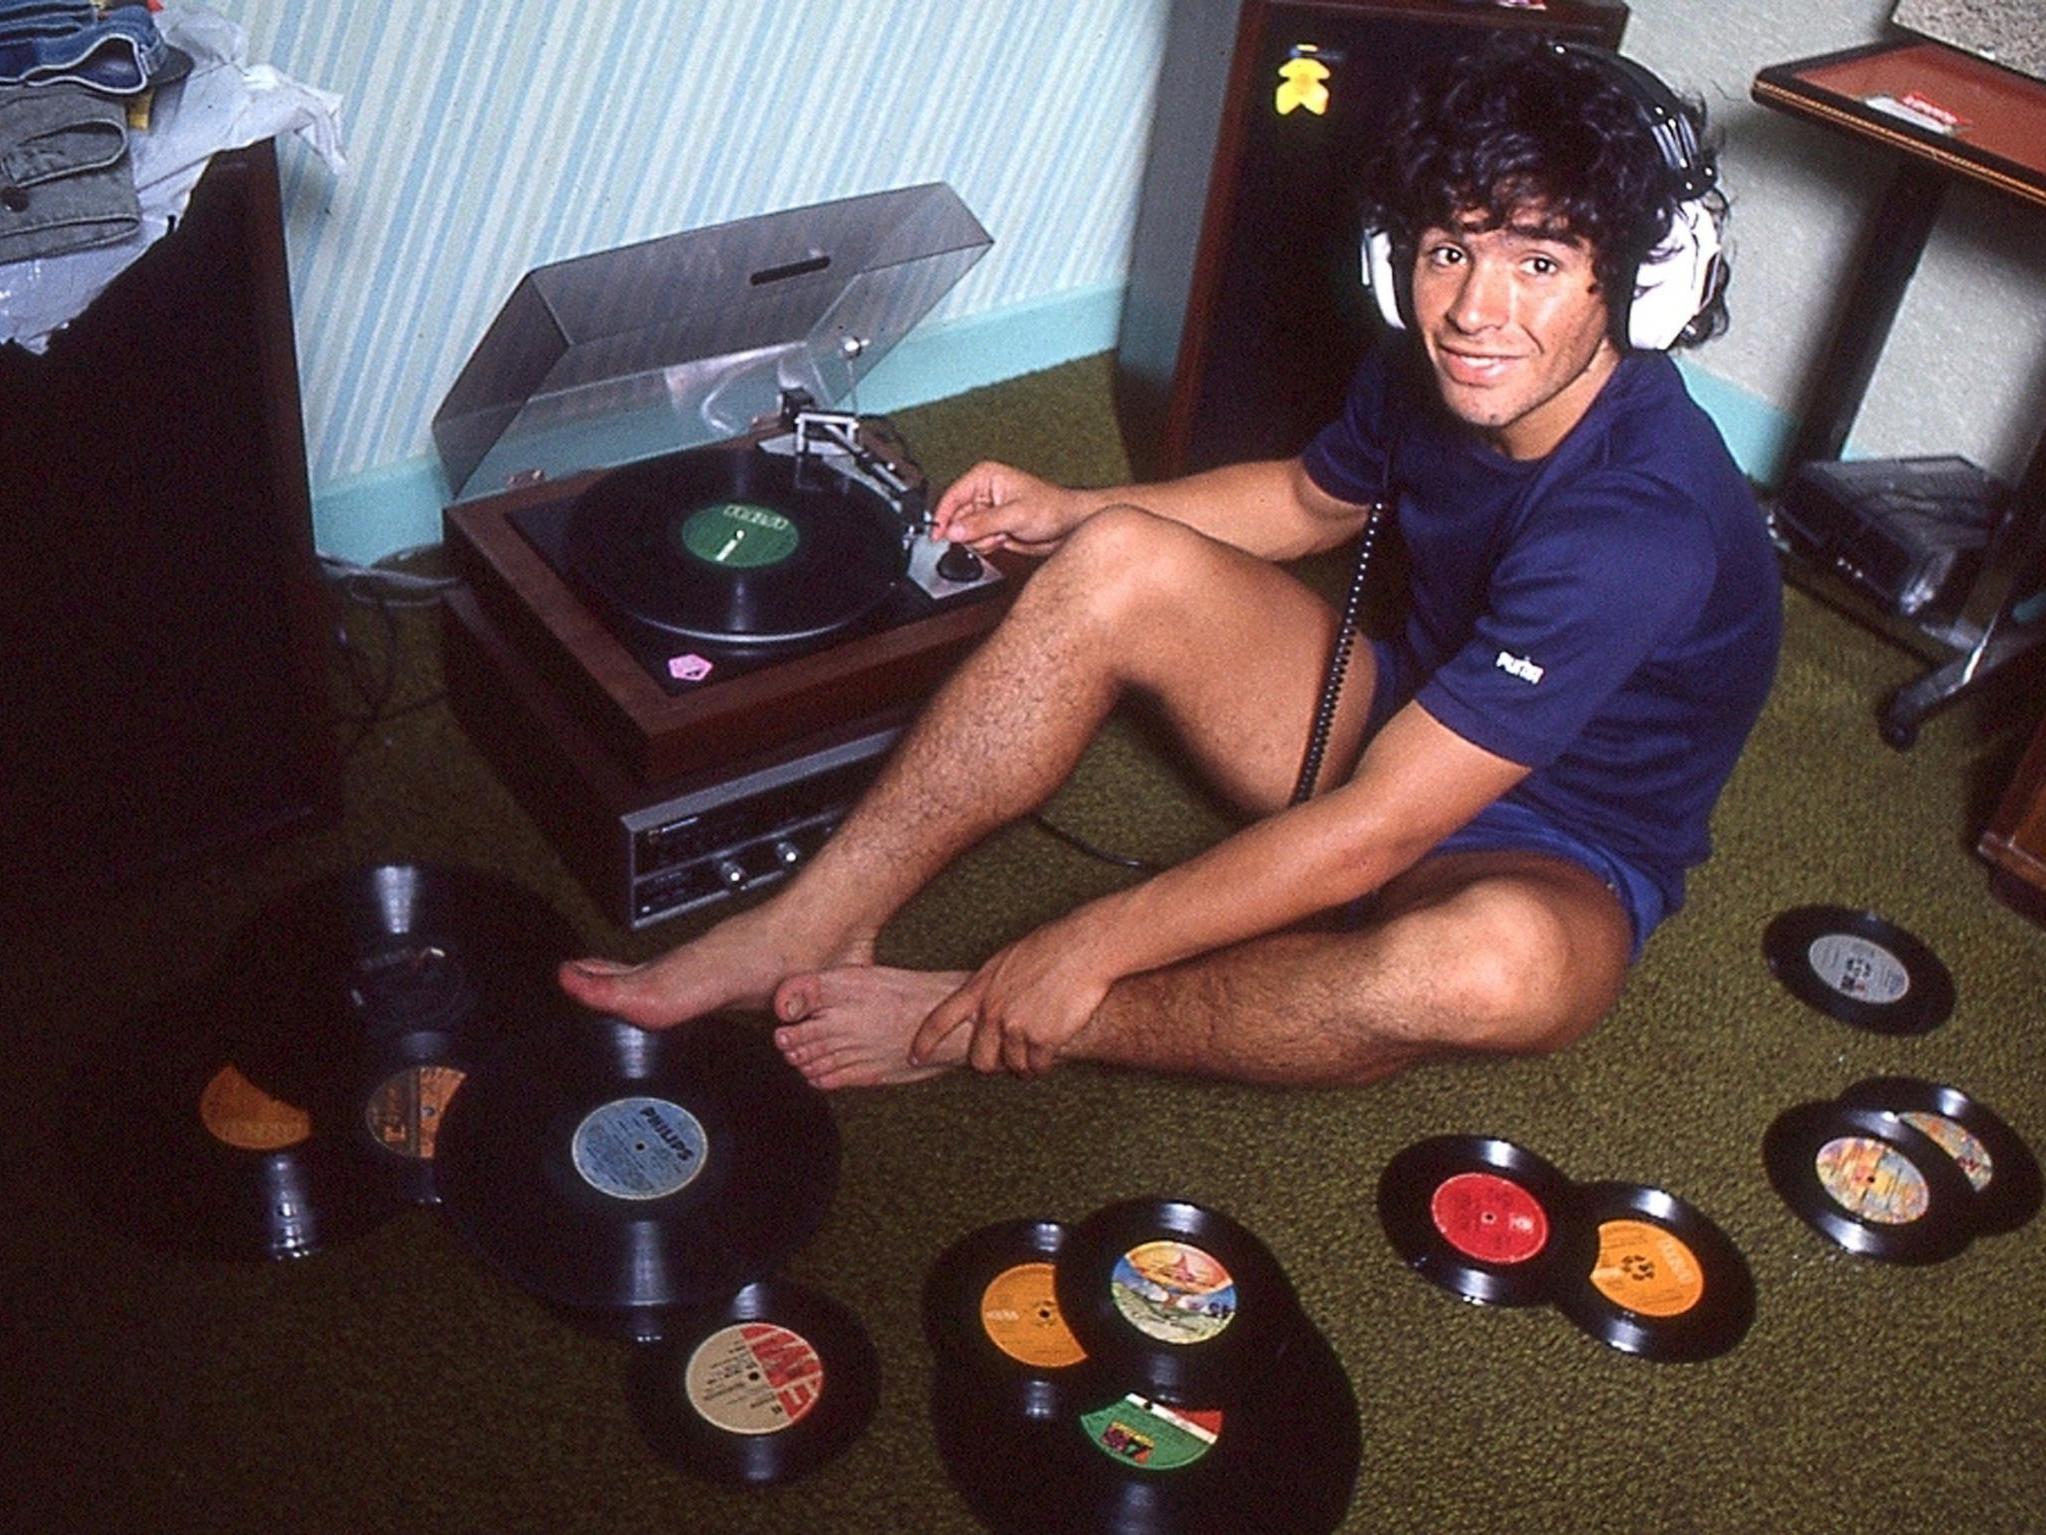 At home with his record collection